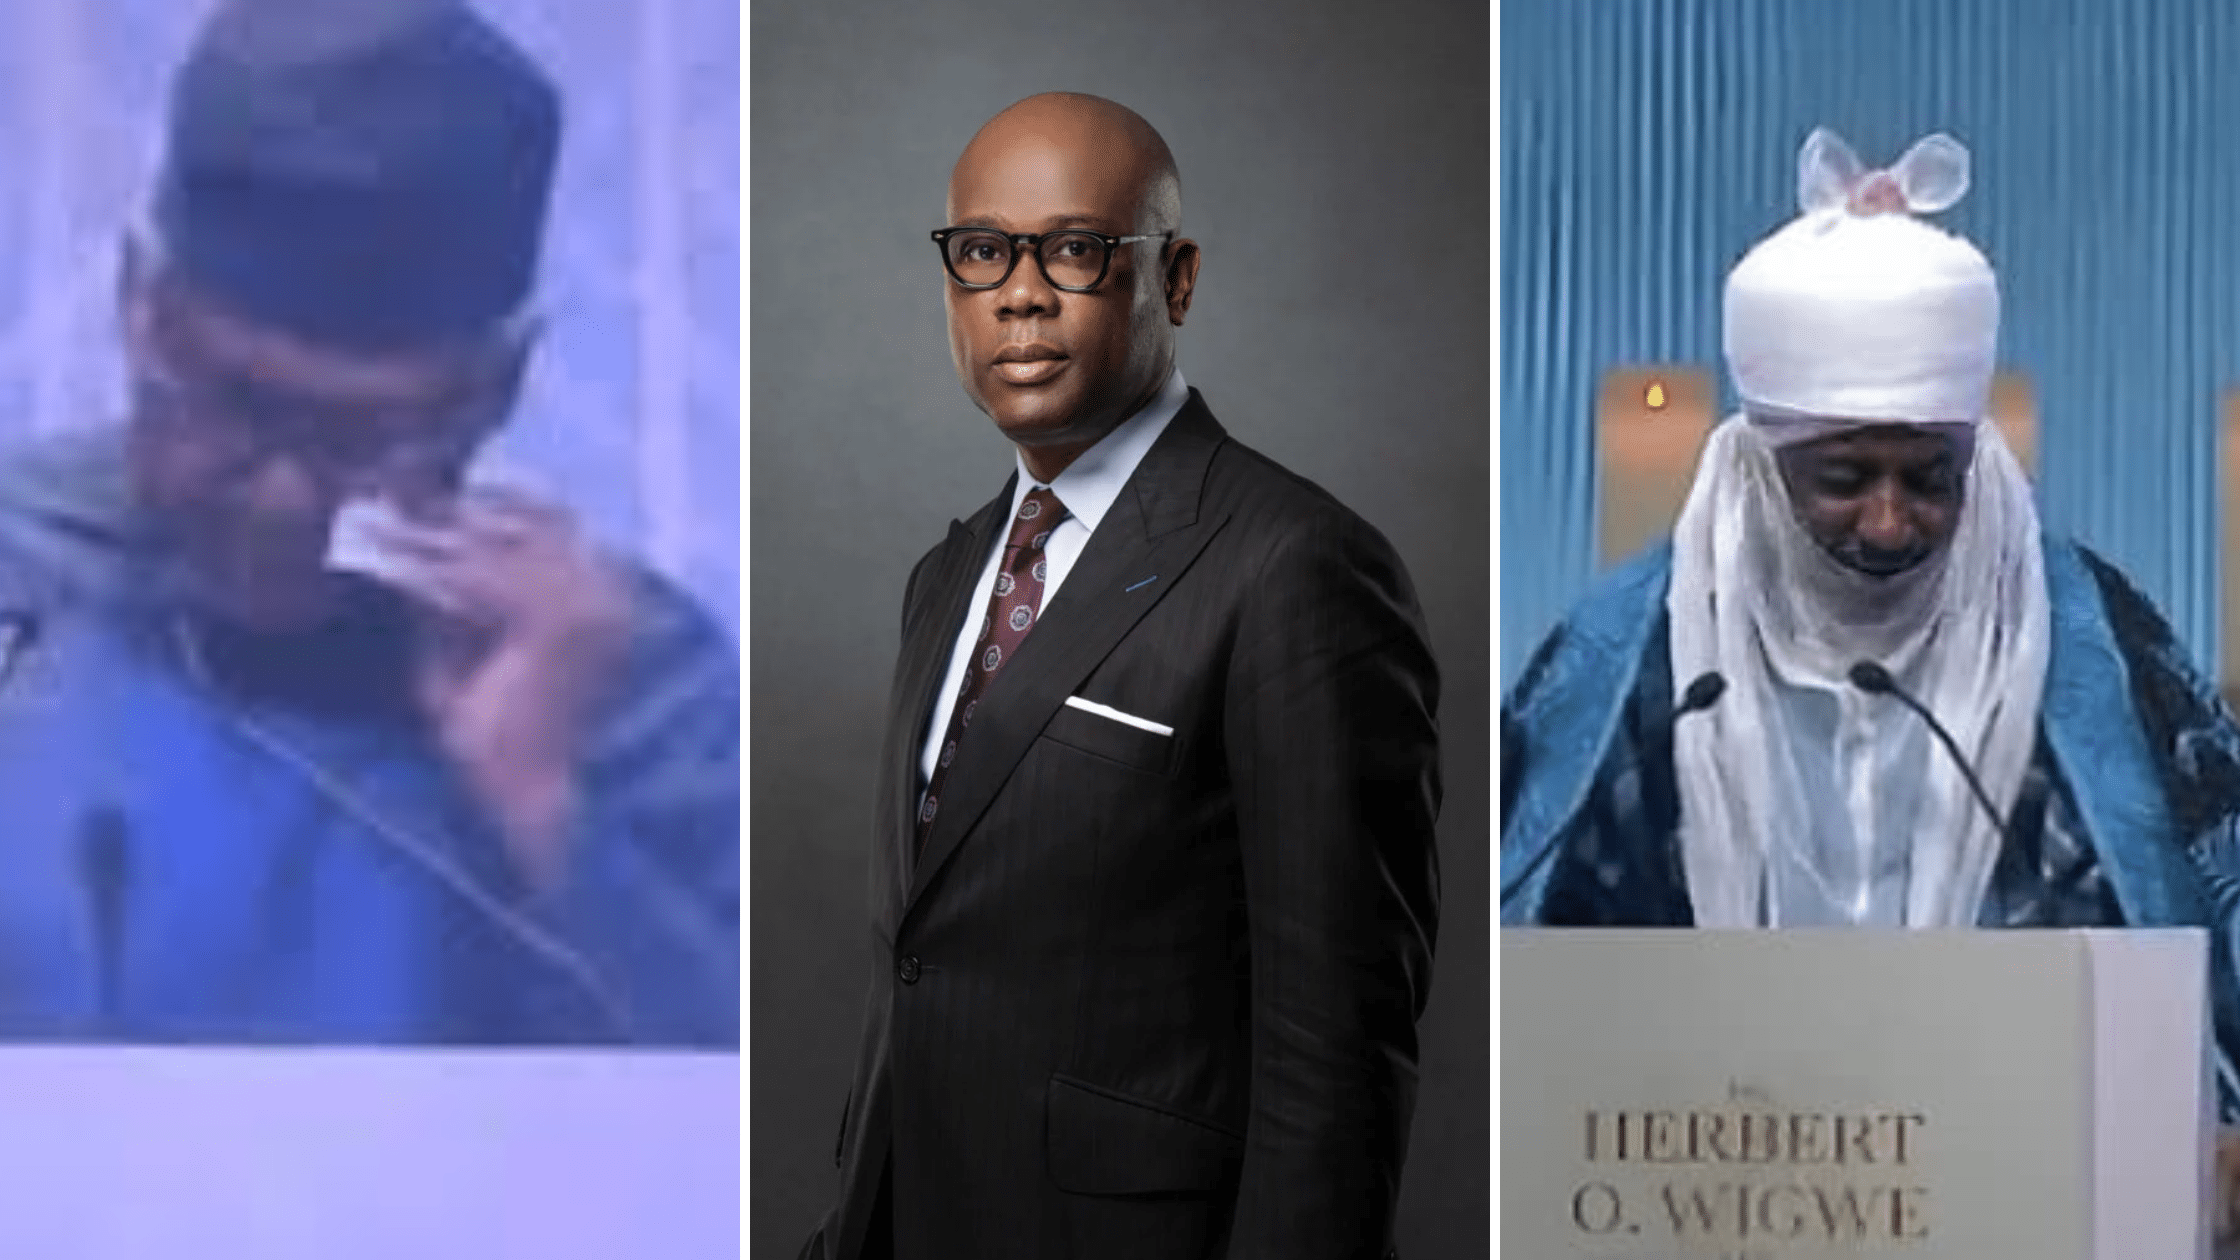 List Of 'Notable' Nigerians, Including Dangote, Who Shed Tears At Herbert Wigwe’s Funeral